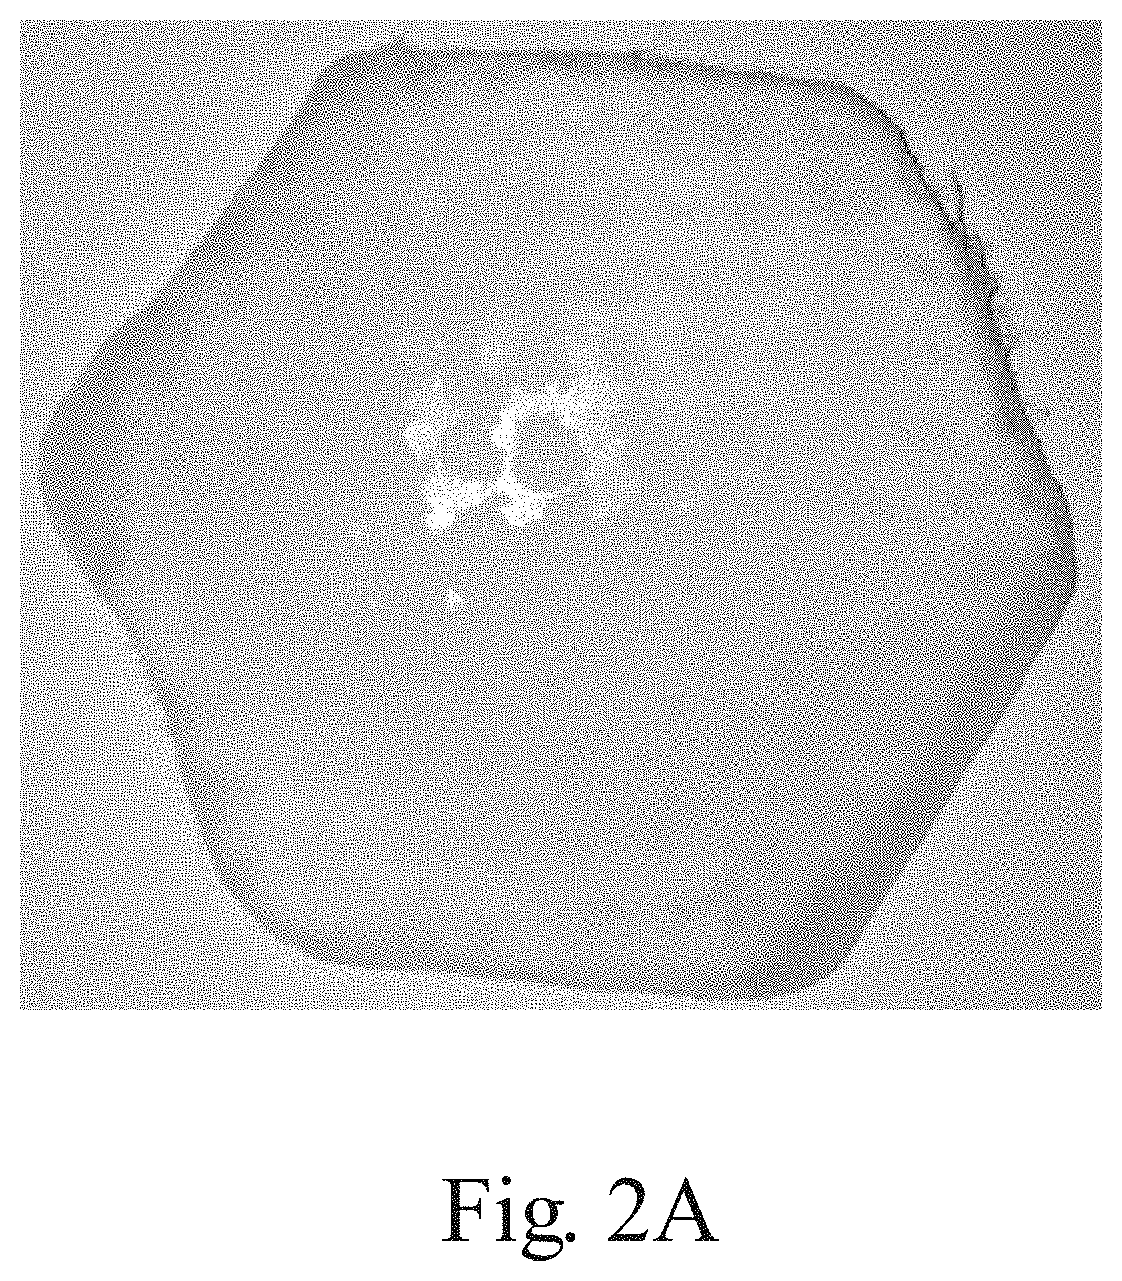 Fibrous structures containing polymer matrix particles with perfume ingredients